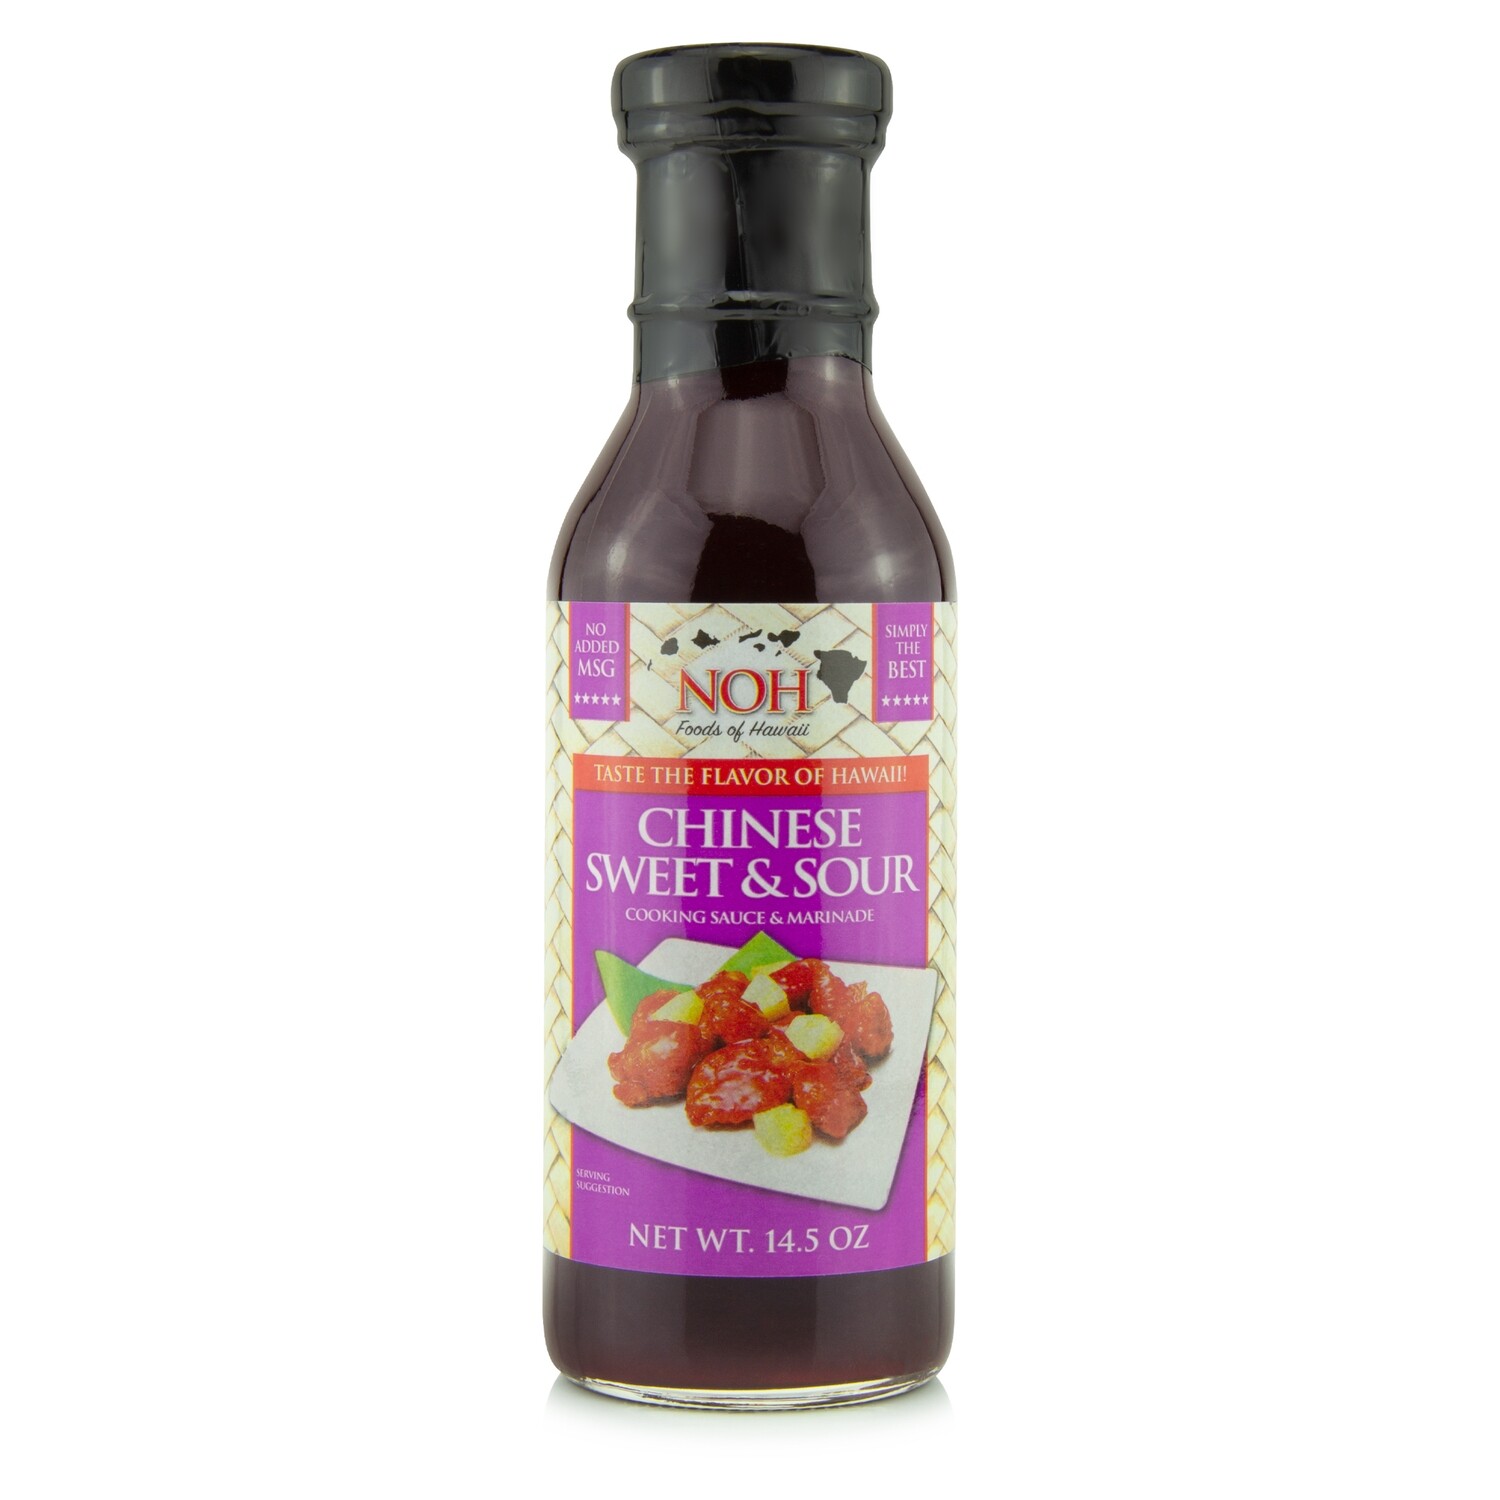 Noh Chinese Sweet & Sour 14.5 oz